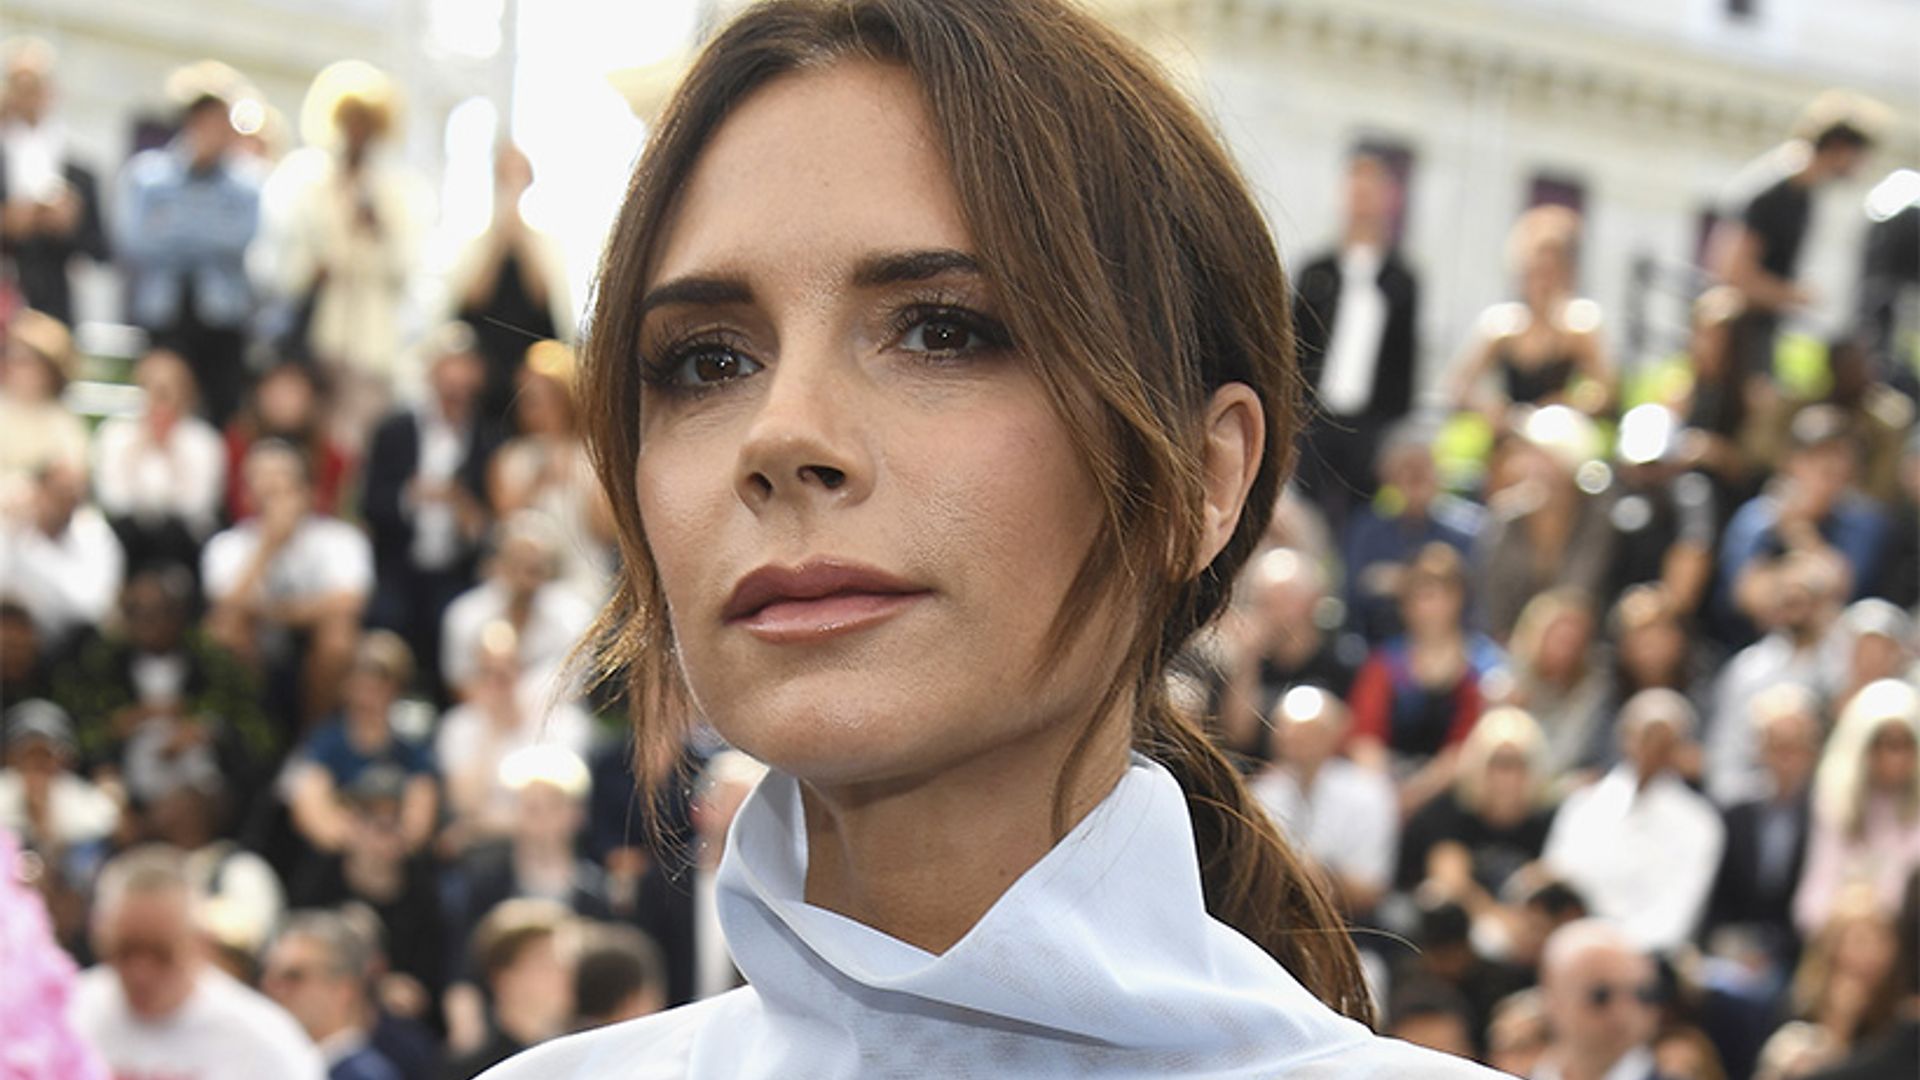 Victoria Beckham slept in her face mask and this is what happened | HELLO!